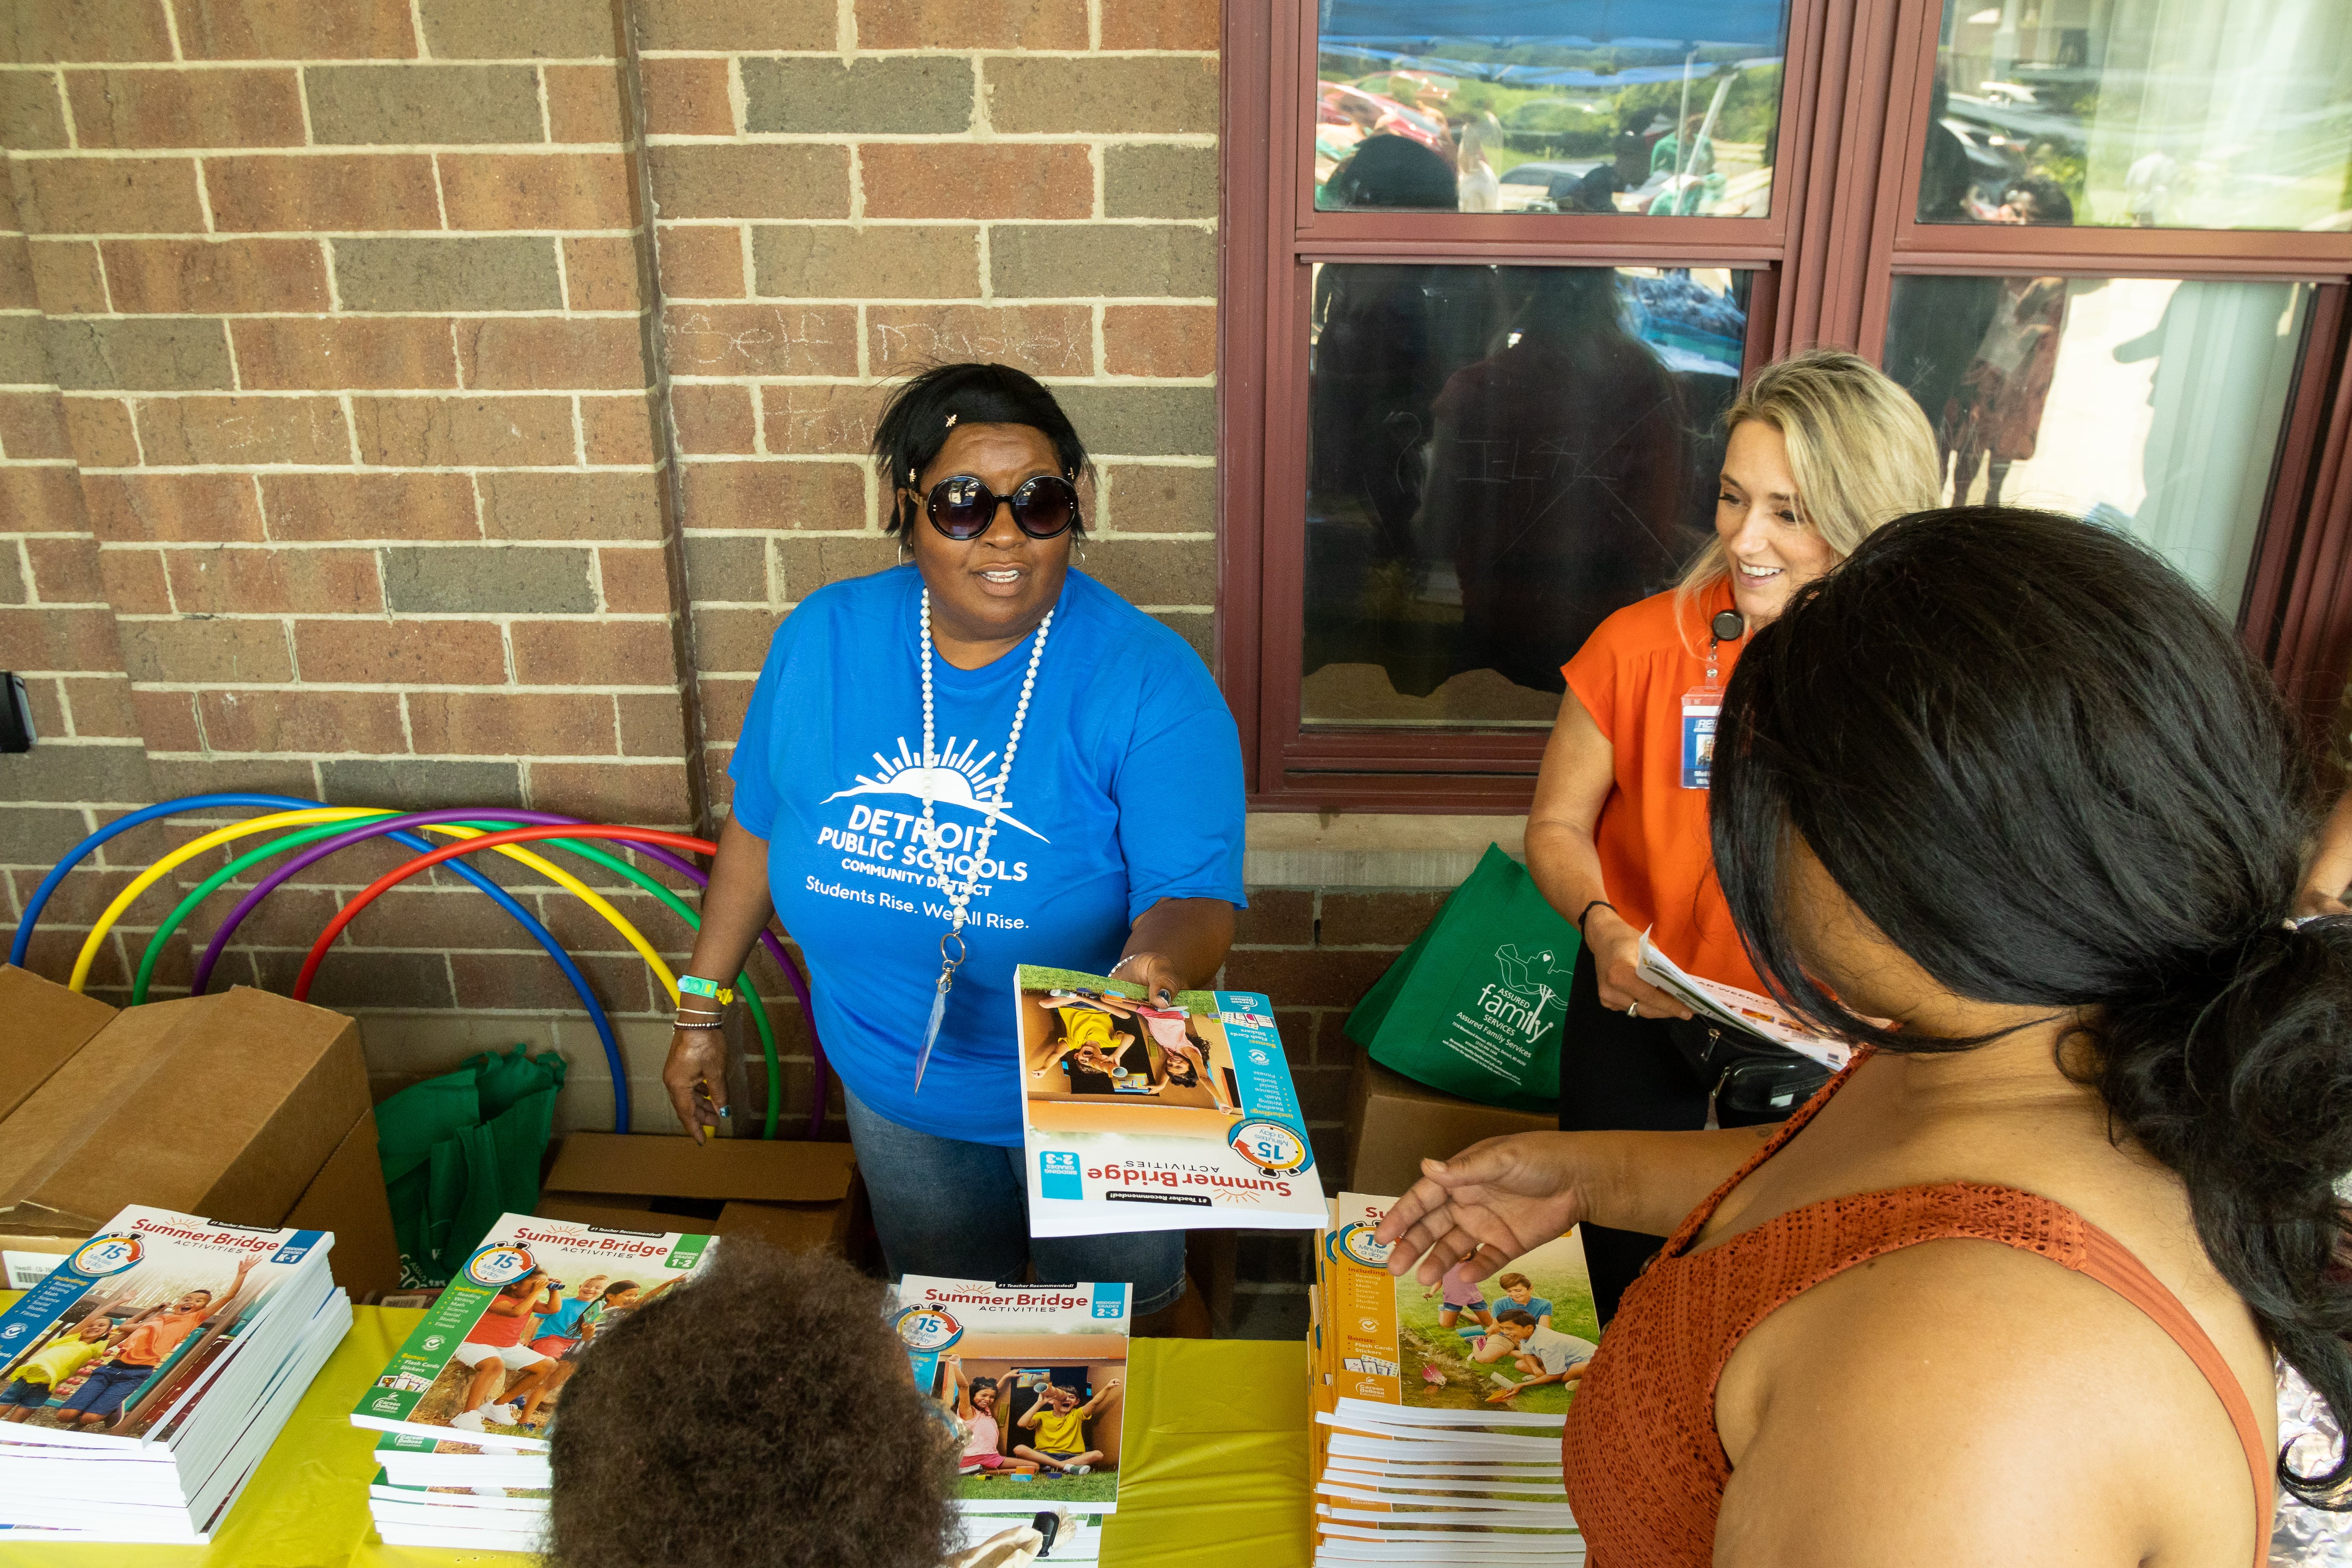 A woman standing behind a table hands curriculum materials to a parent who is accompanied by her child.